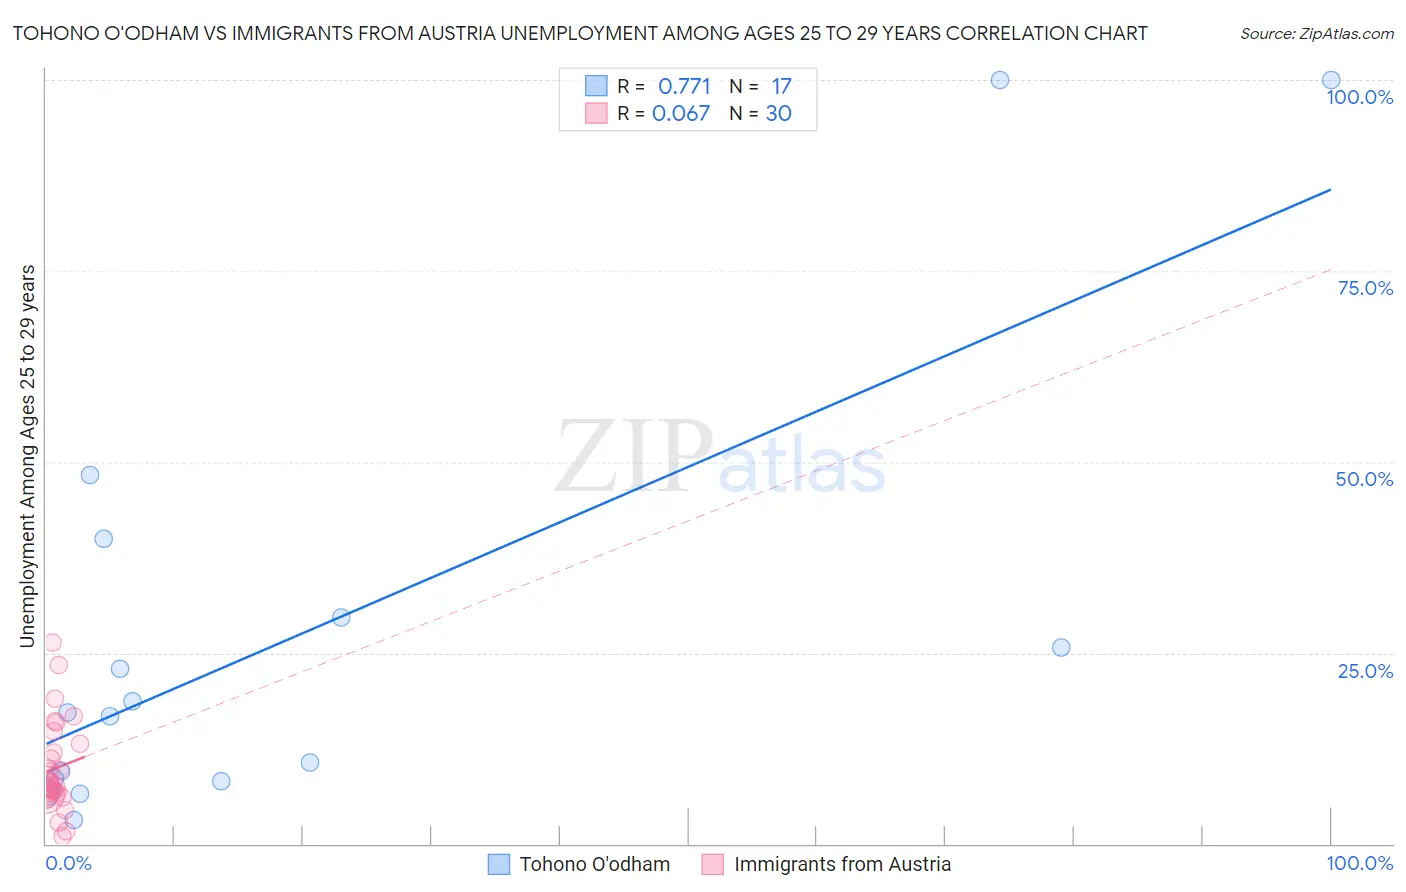 Tohono O'odham vs Immigrants from Austria Unemployment Among Ages 25 to 29 years